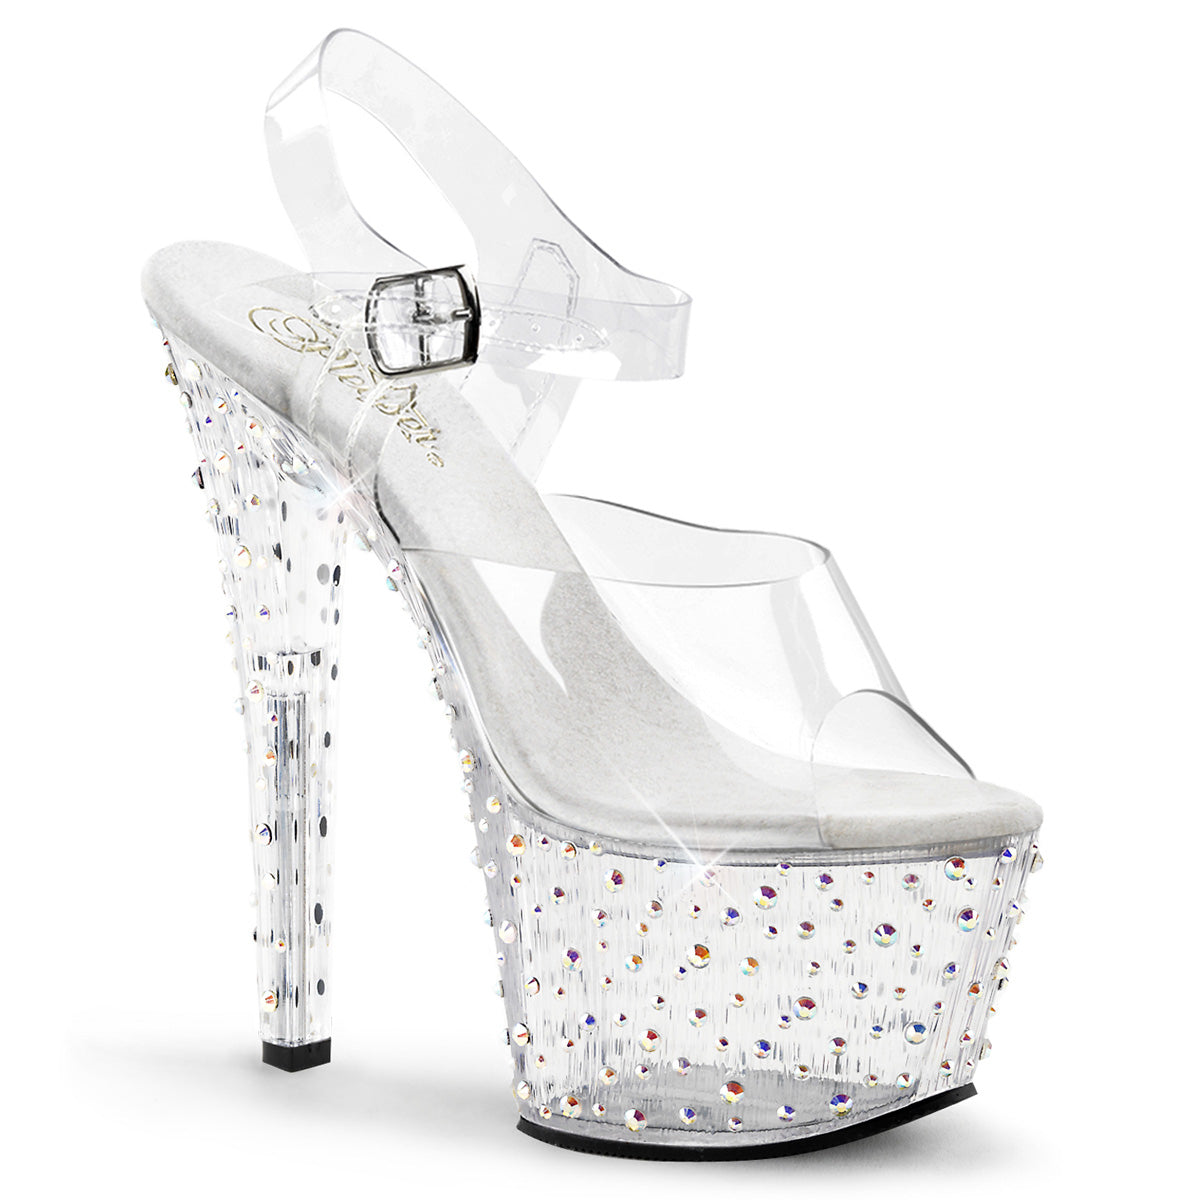 STARDANCE-708 7" Heel Clear Silver Pole Dancing Platforms-Pleaser- Sexy Shoes